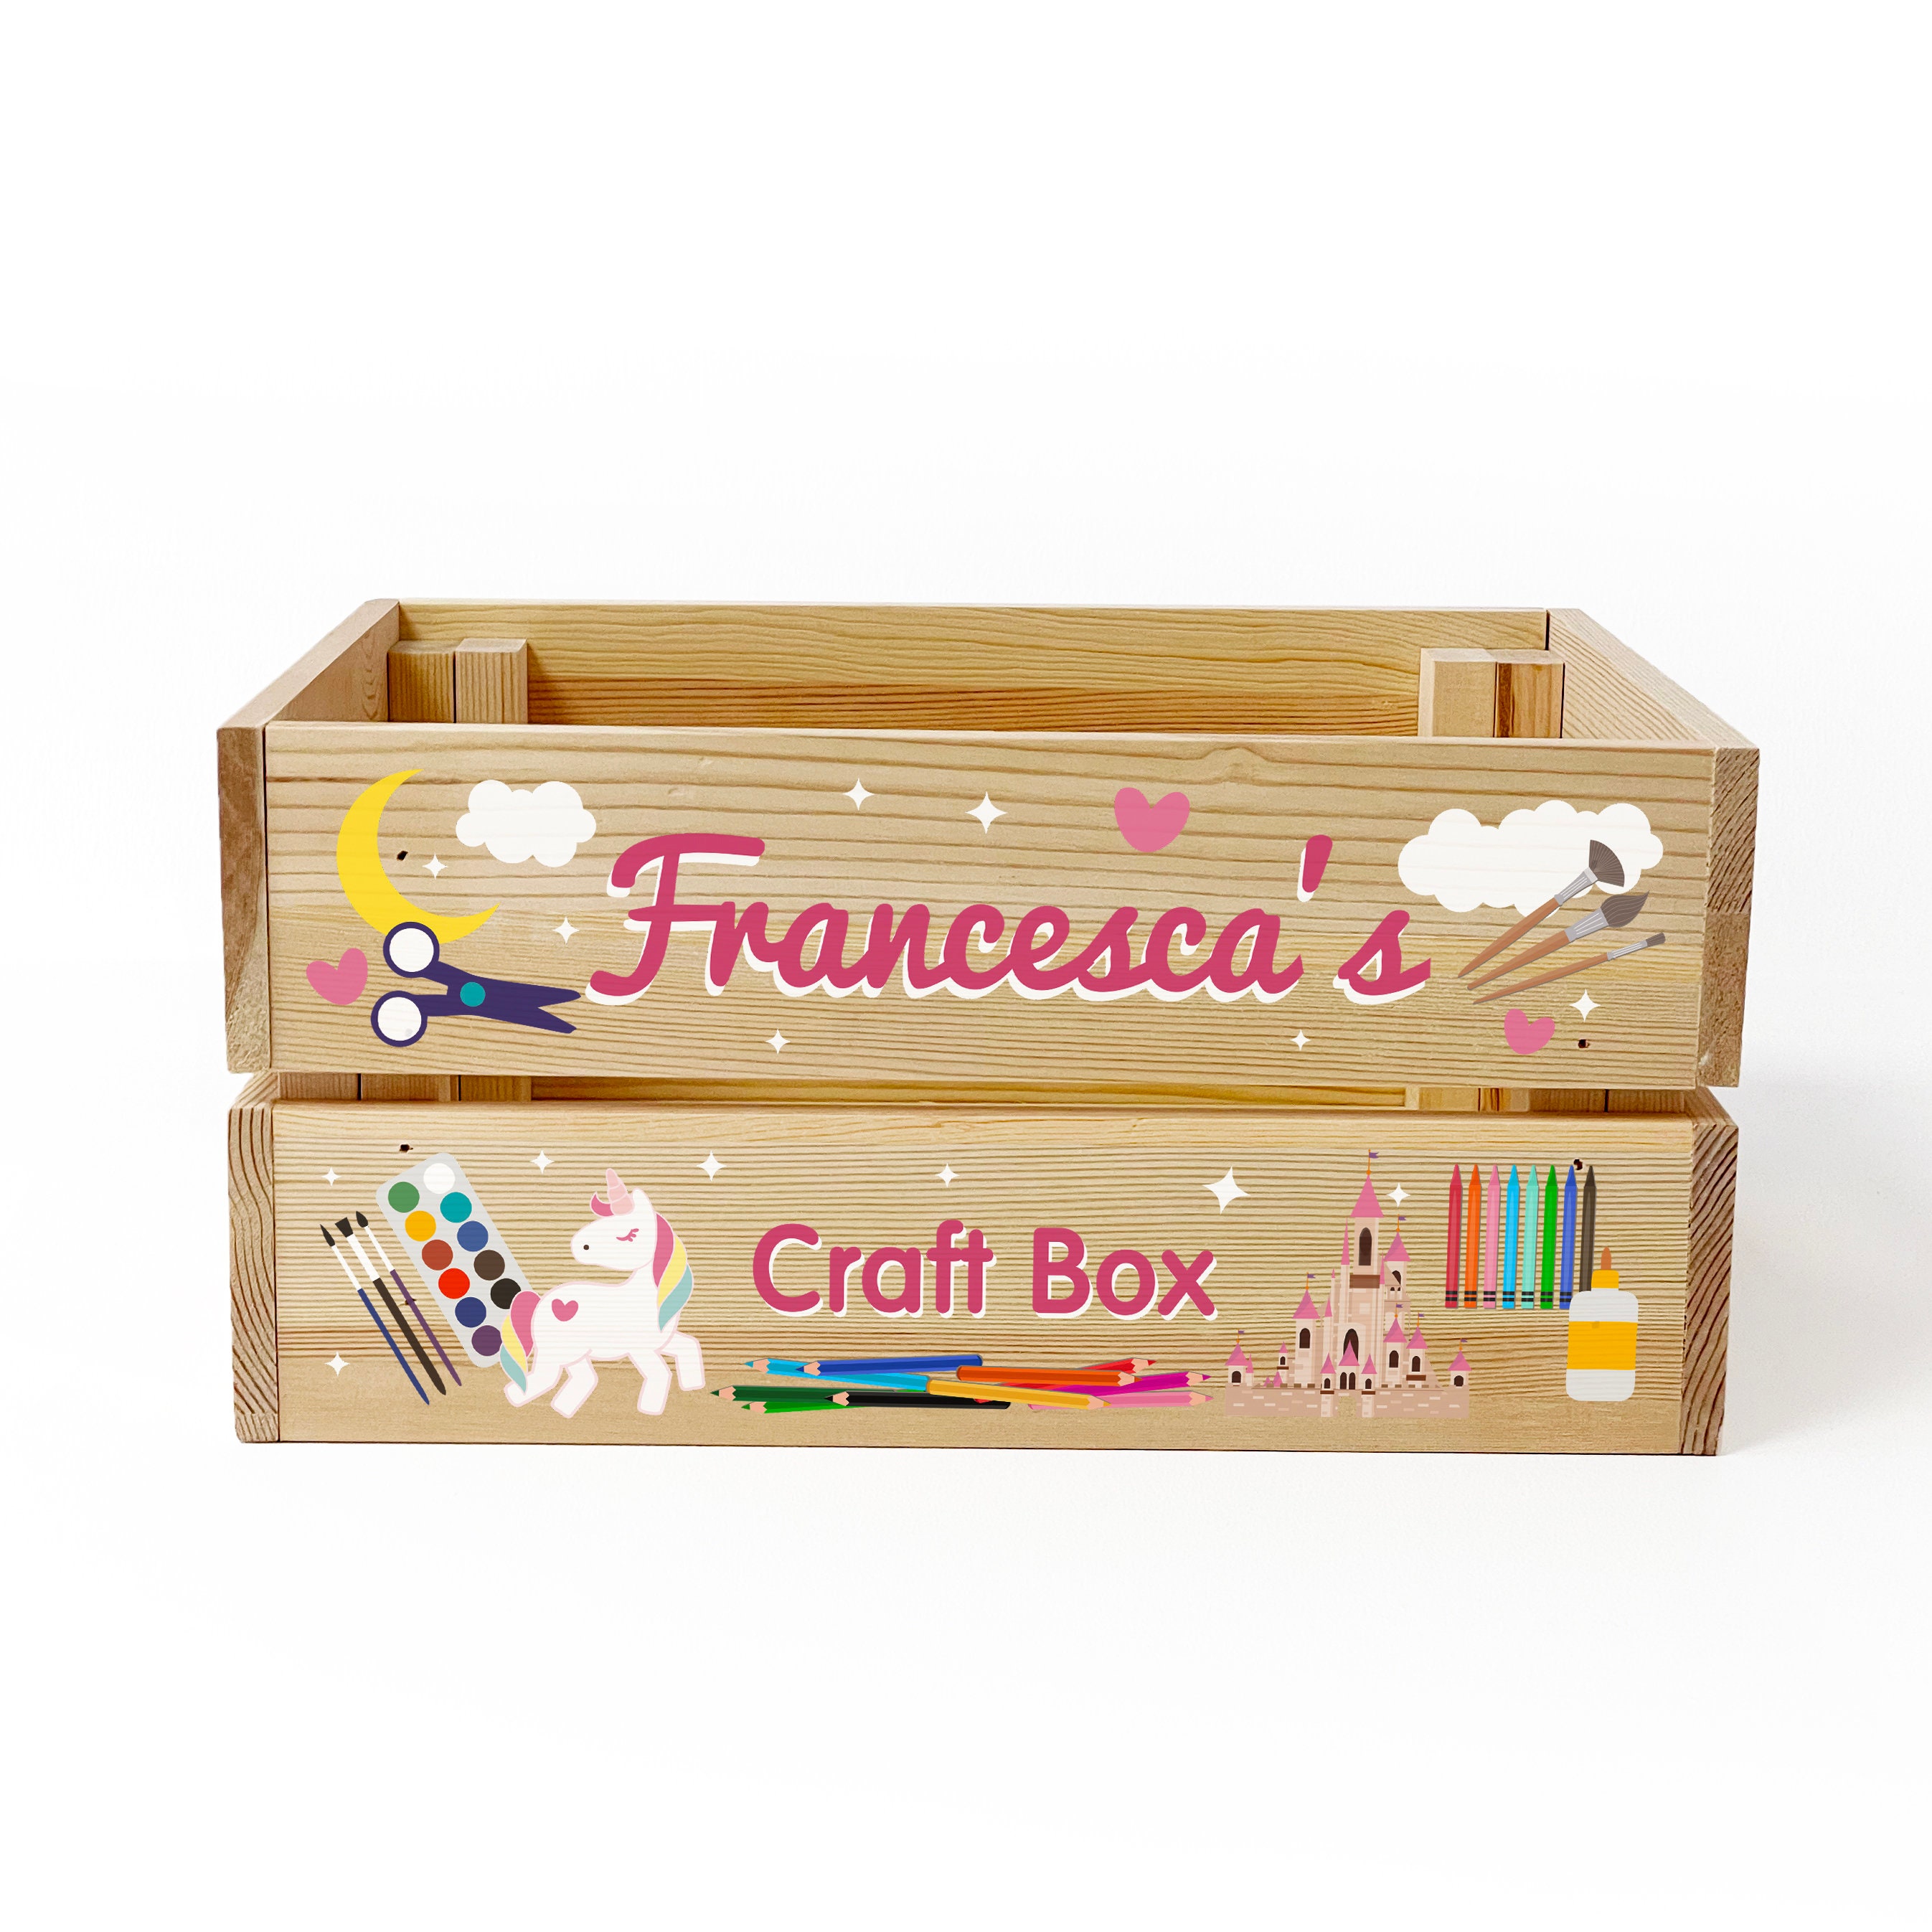 Personalised Wooden Arts & Crafts Box for Kids BOY GIRL Childrens Crate  Gift for Birthday or Christmas 